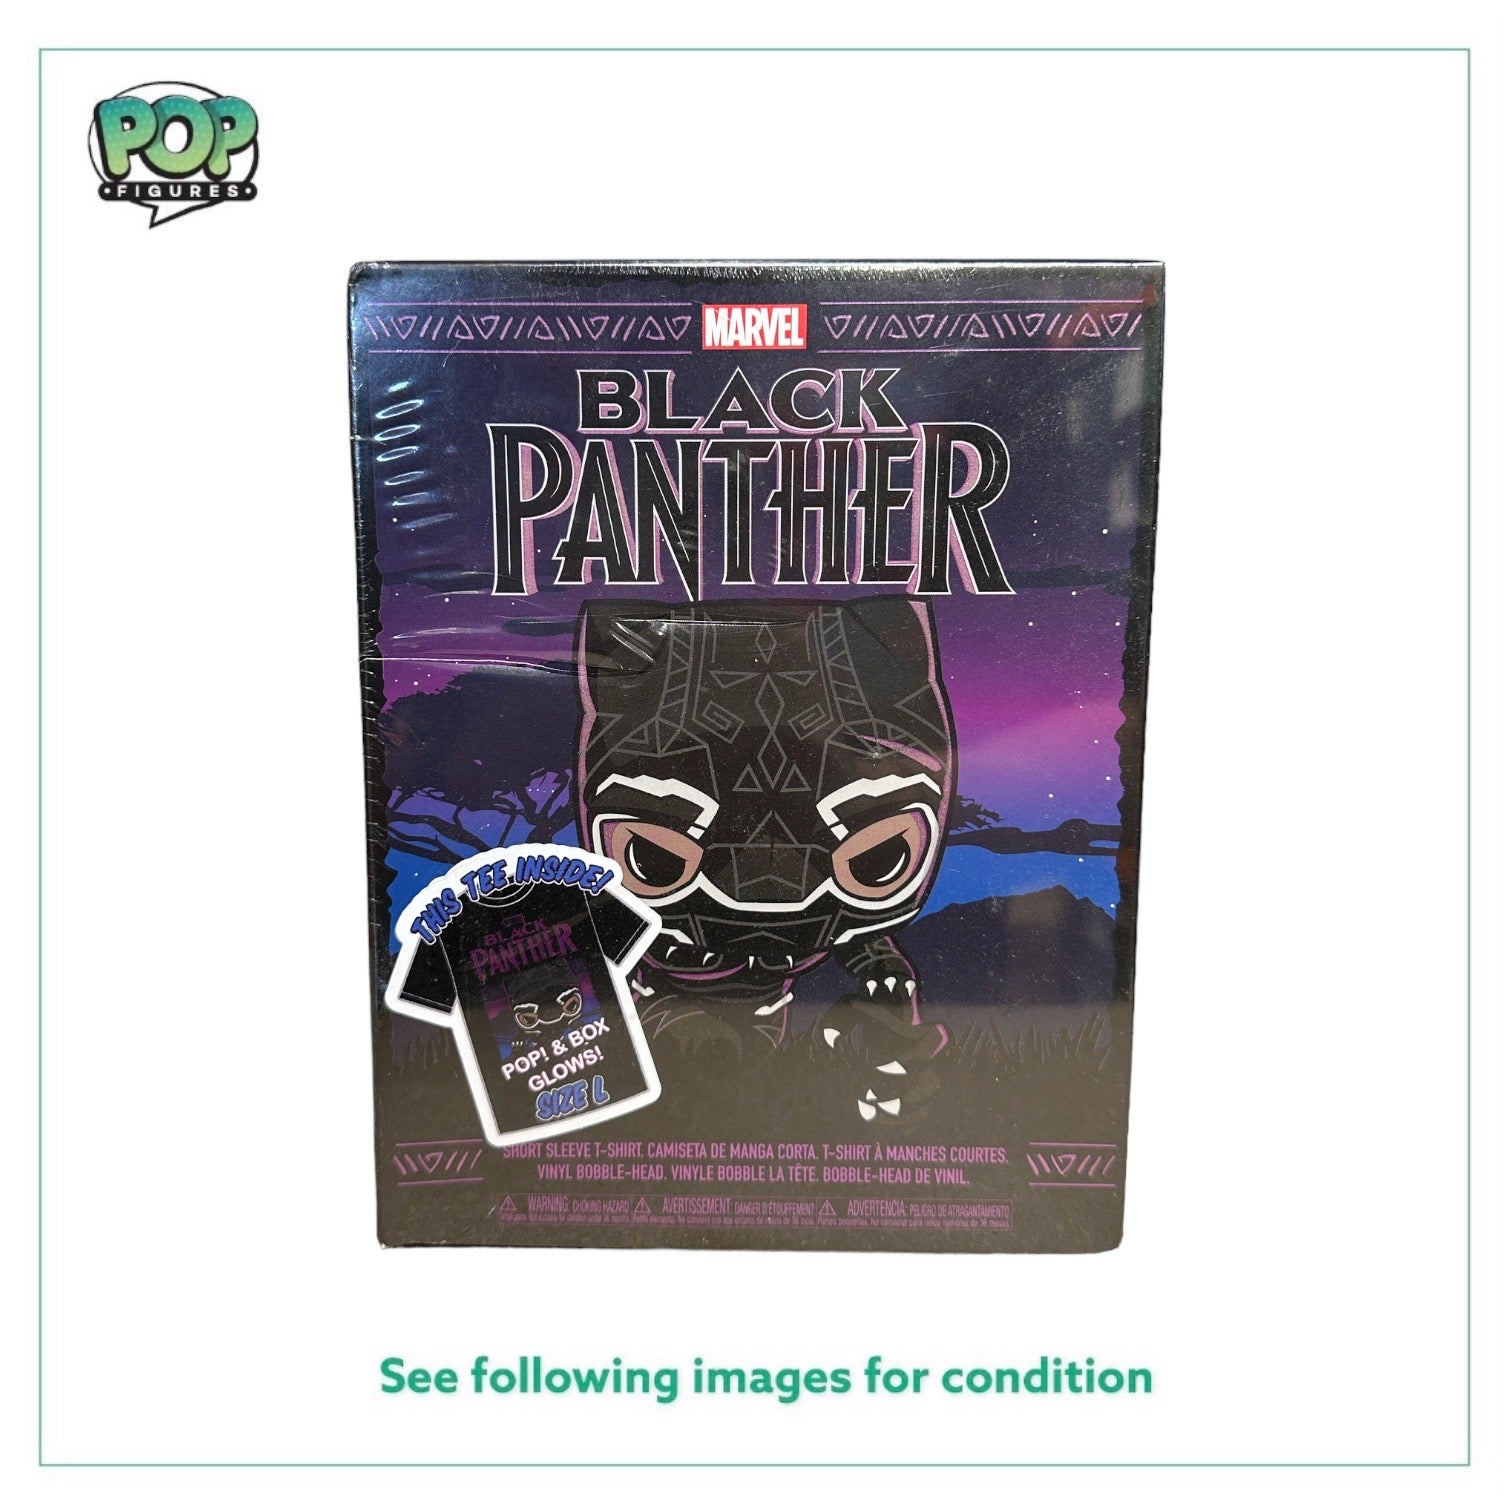 Black Panther #273 (Purple Glows in the Dark) Funko Pop T-Shirt Bundle! - Black Panther - Target Exclusive - Sealed - Condition 8.5/10